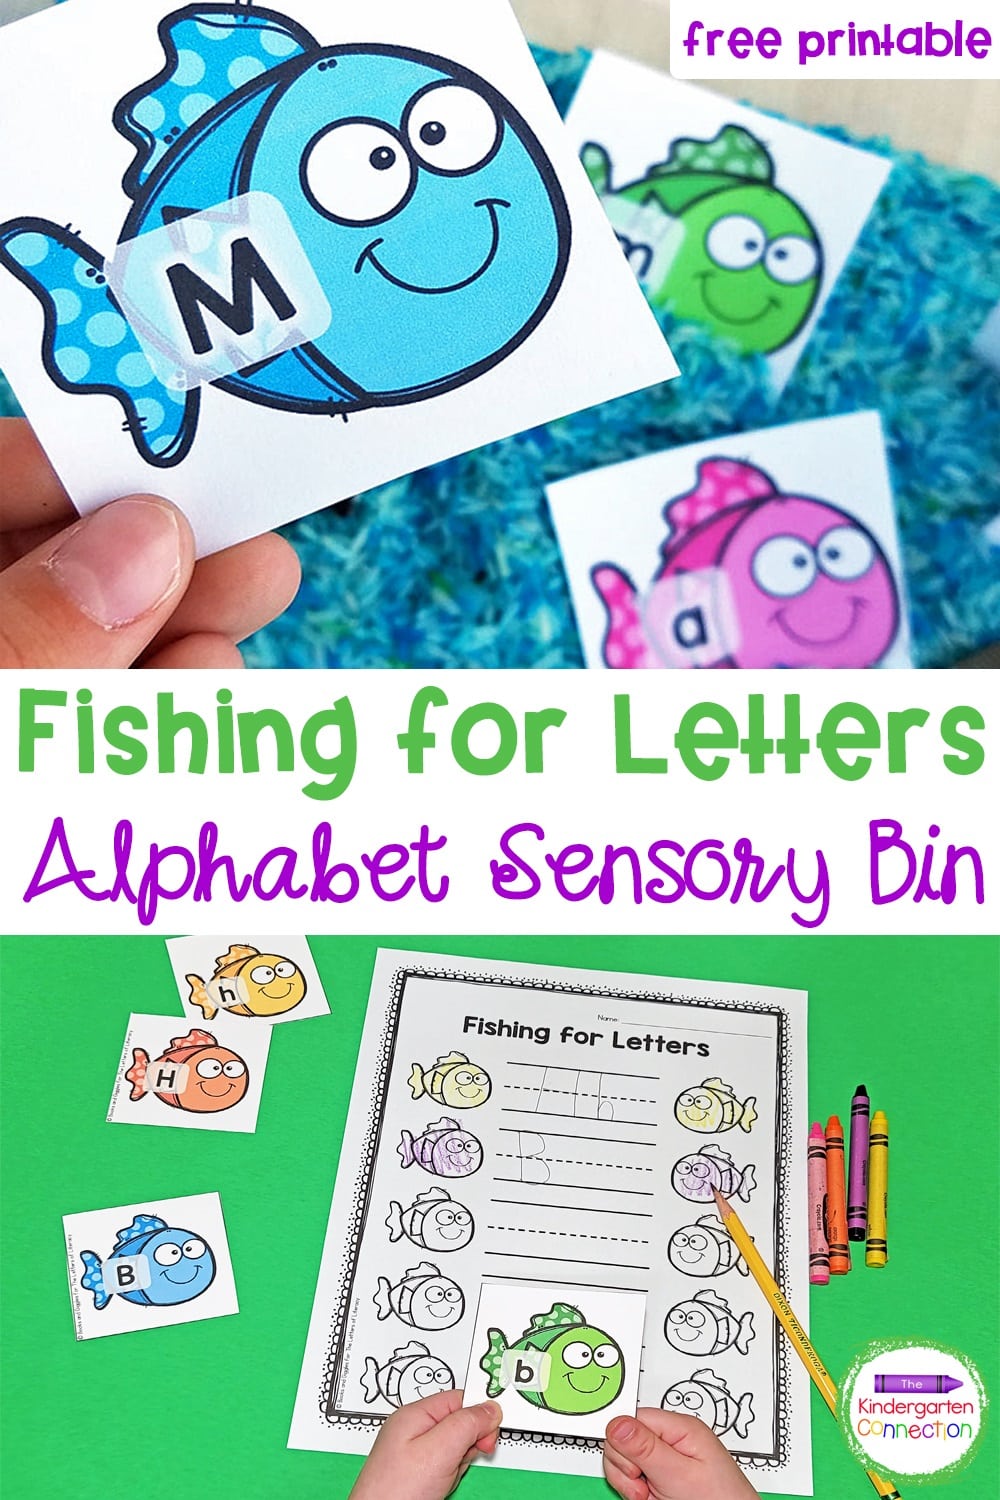 This free Fishing for Letters Alphabet Sensory Bin Activity provides practice with letter recognition and letter writing skills!